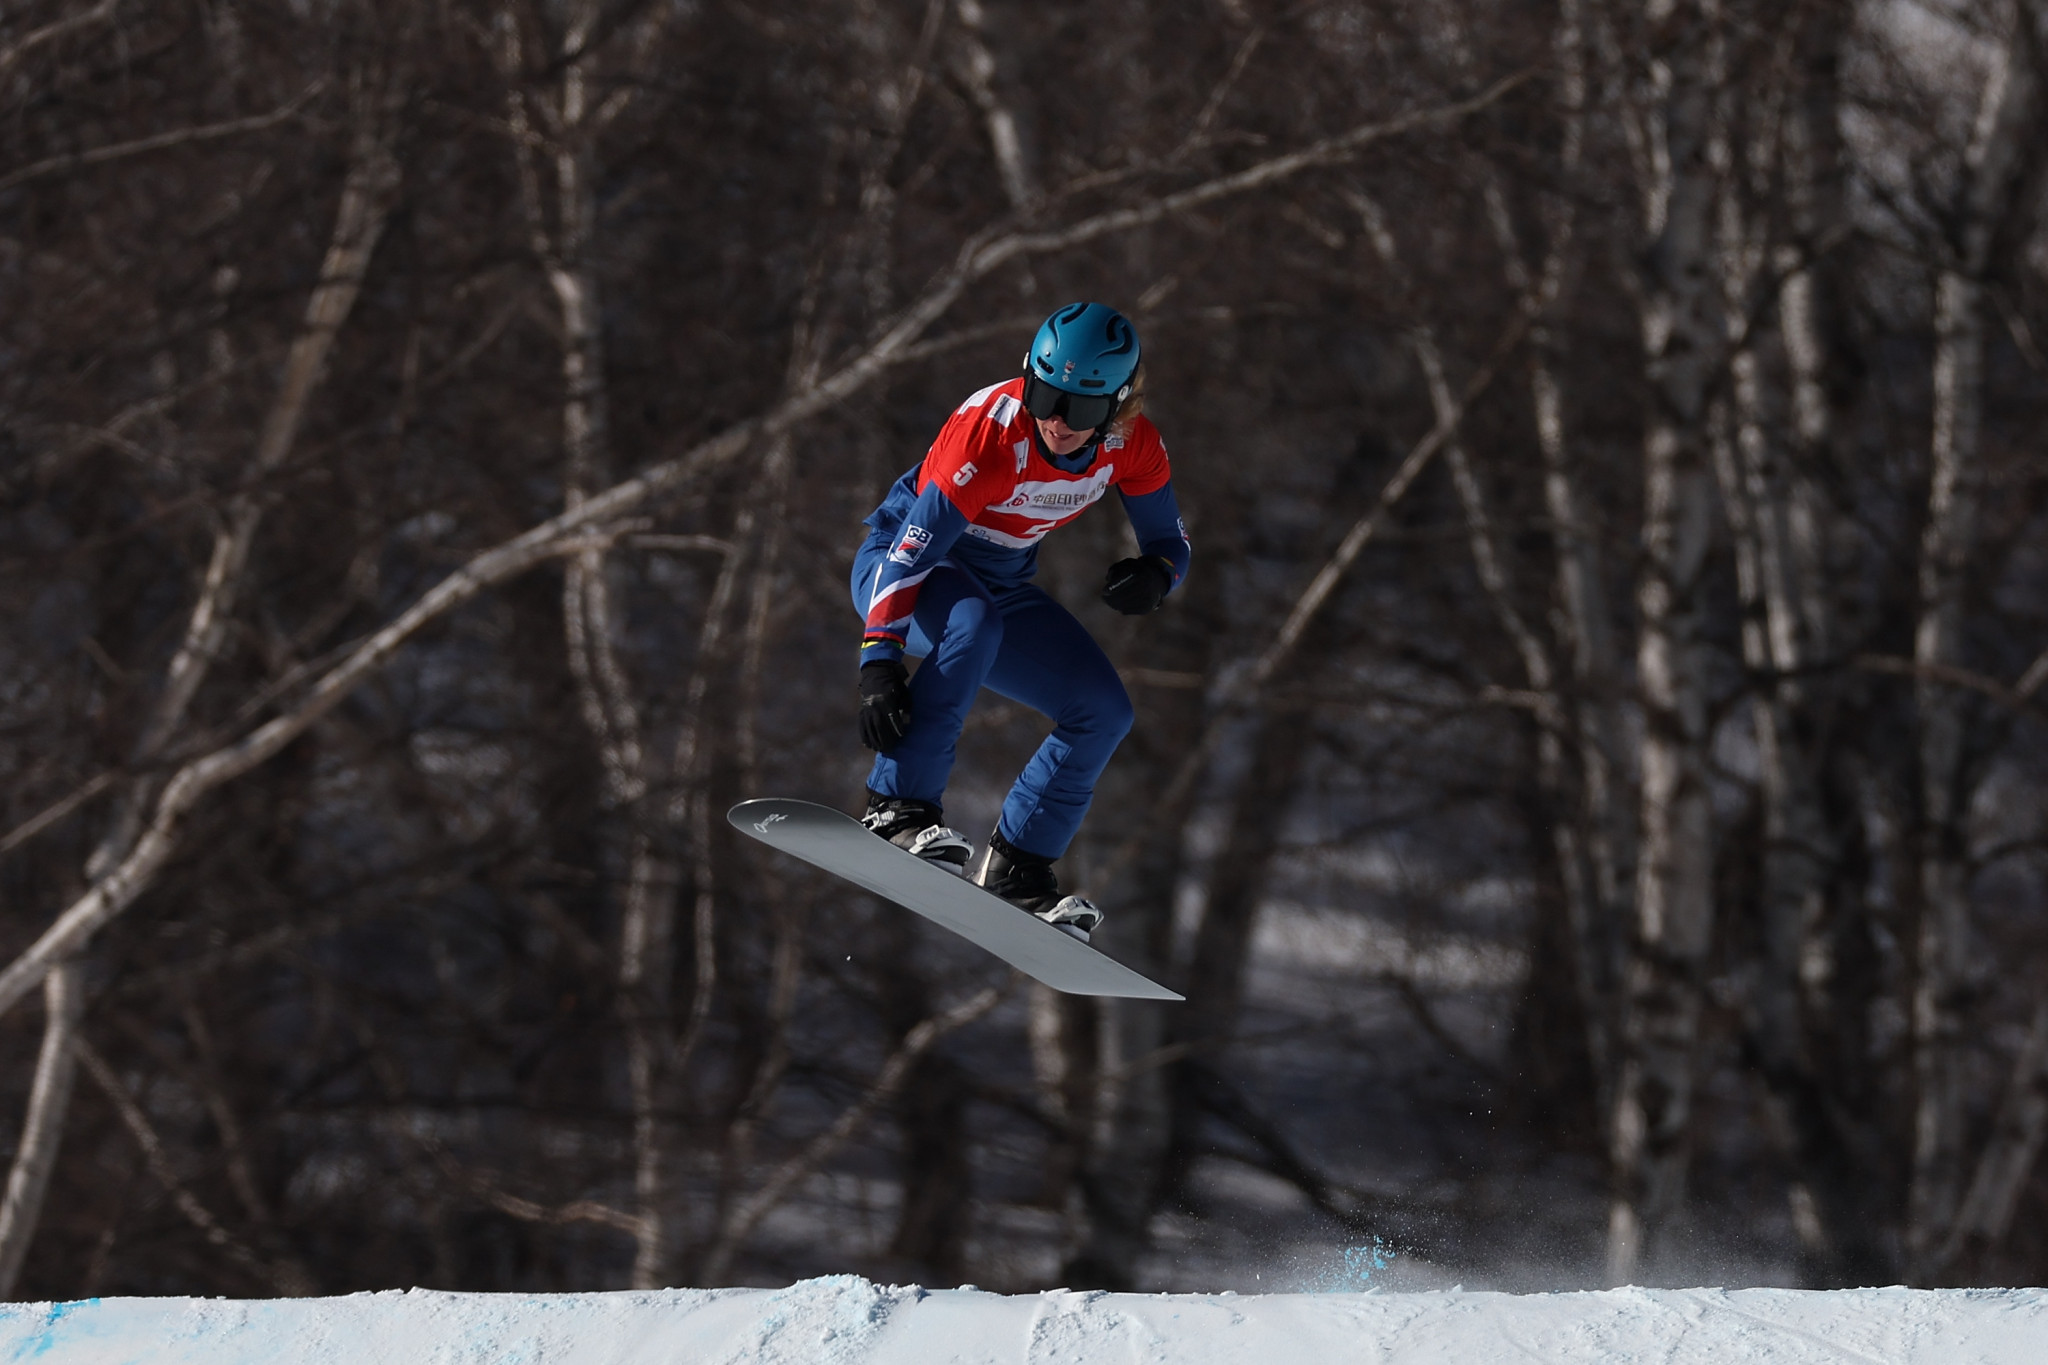 Charlotte Bankes leads the Snowboard Cross World Cup standings by 35 points ©Getty Images